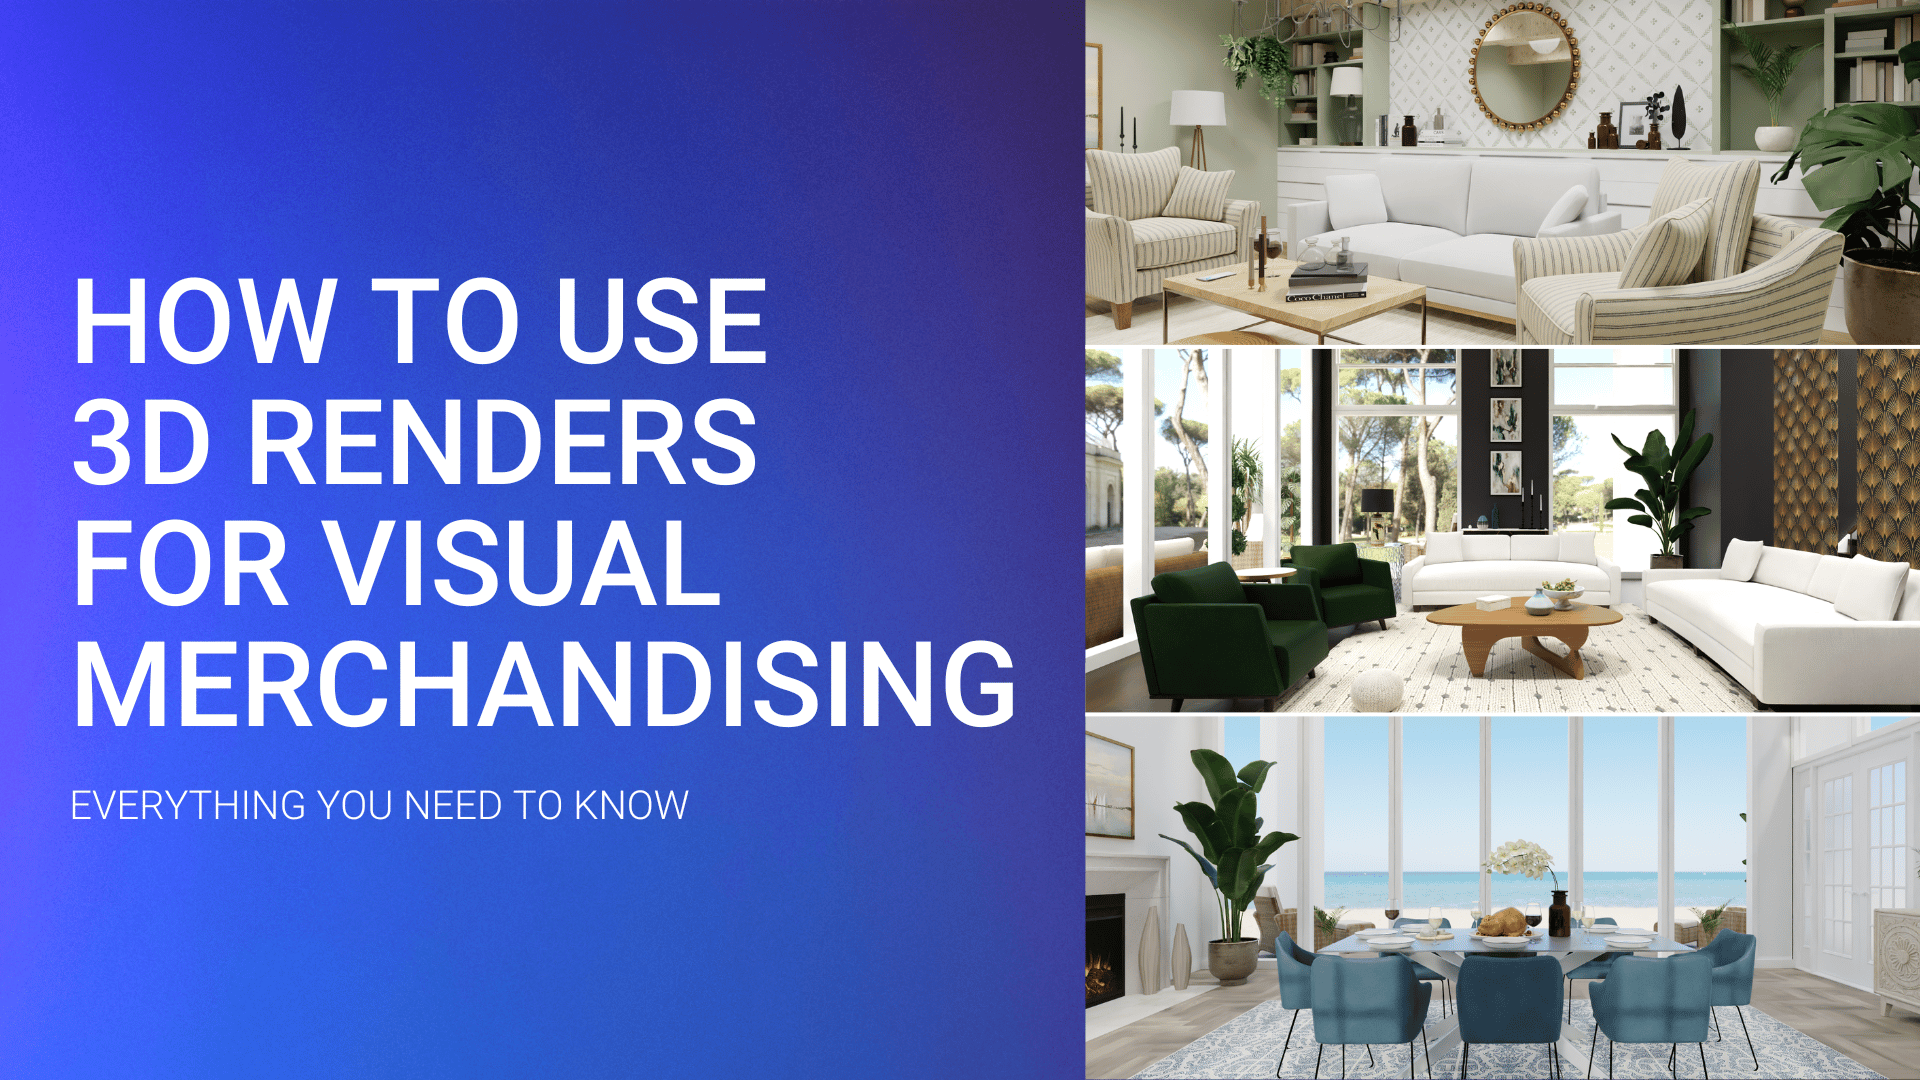 How to Use 3D Renders for Visual Merchandising